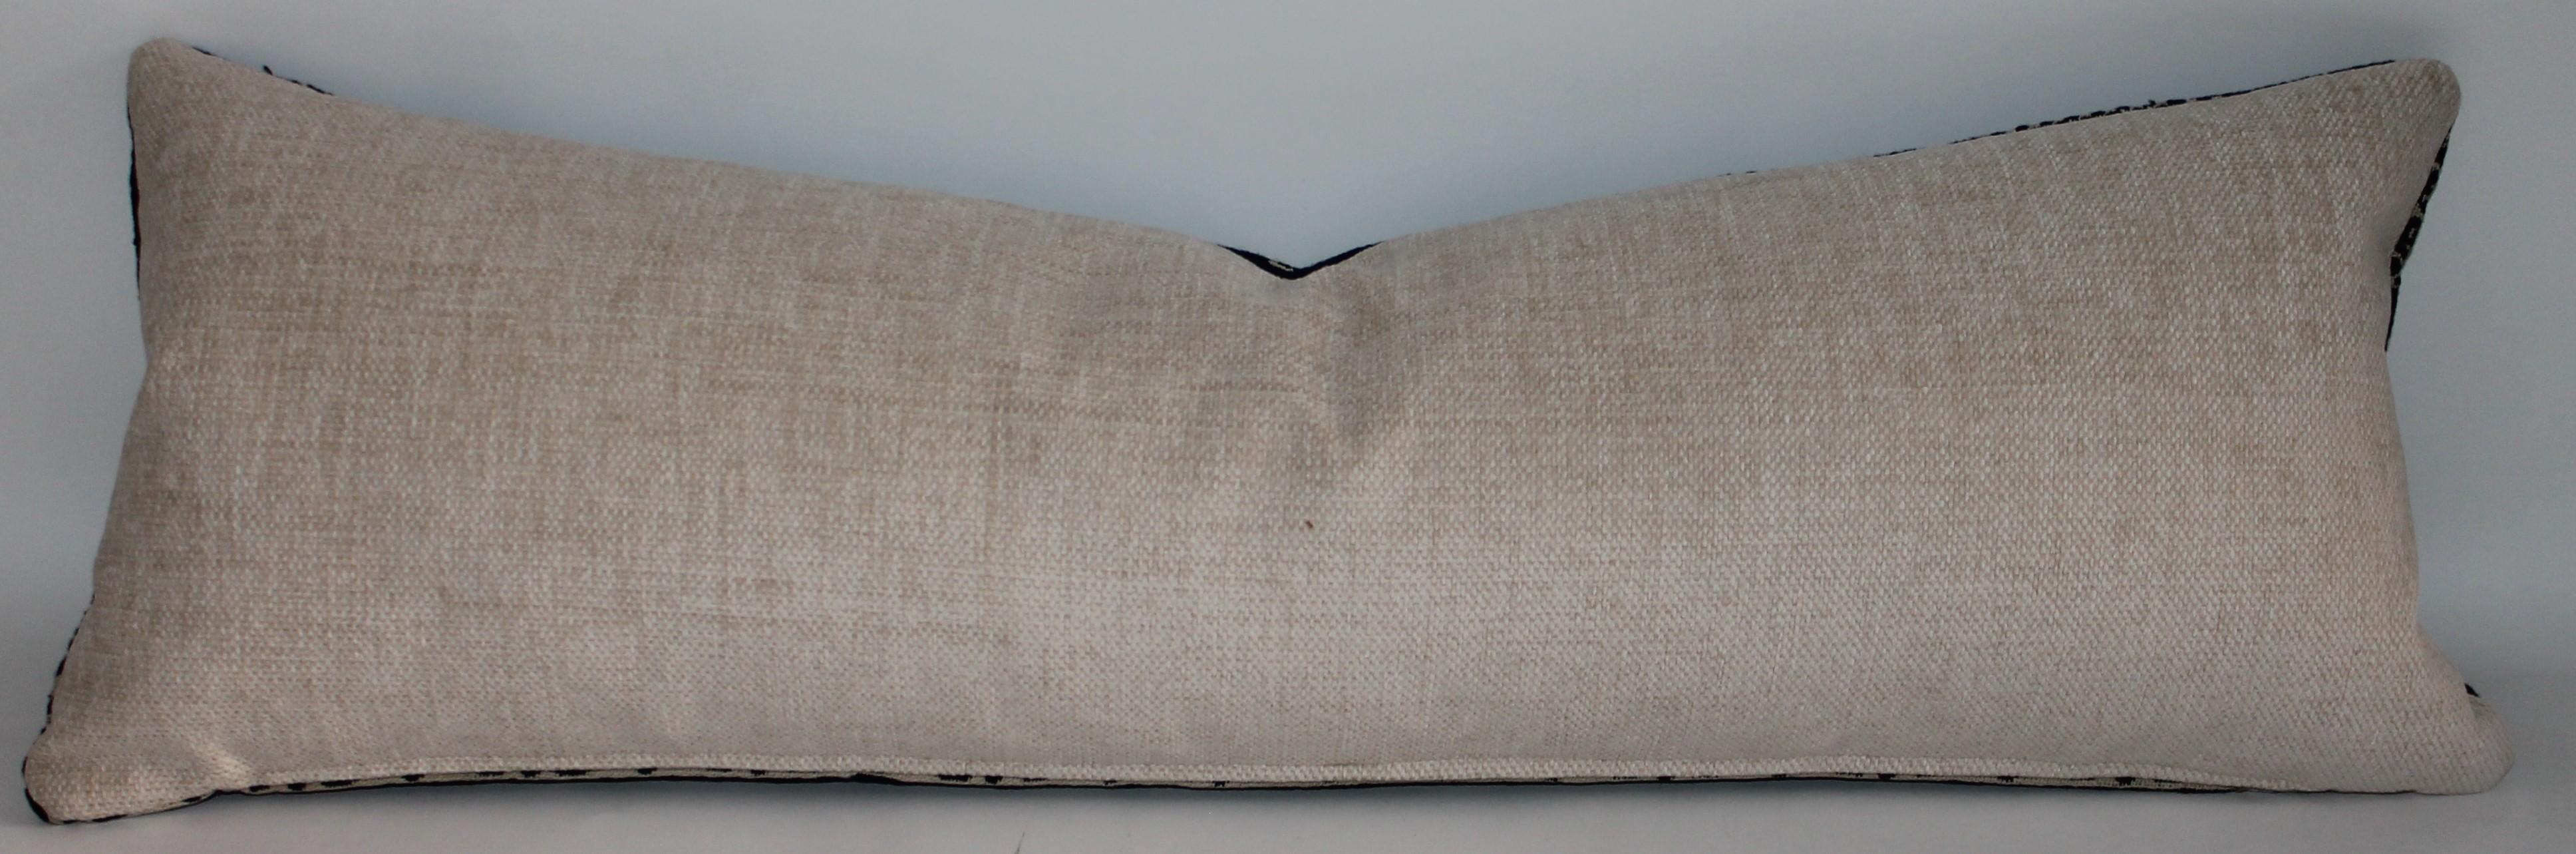 19th Century 19th C Pictorial Coverlet Bolster Pillow For Sale